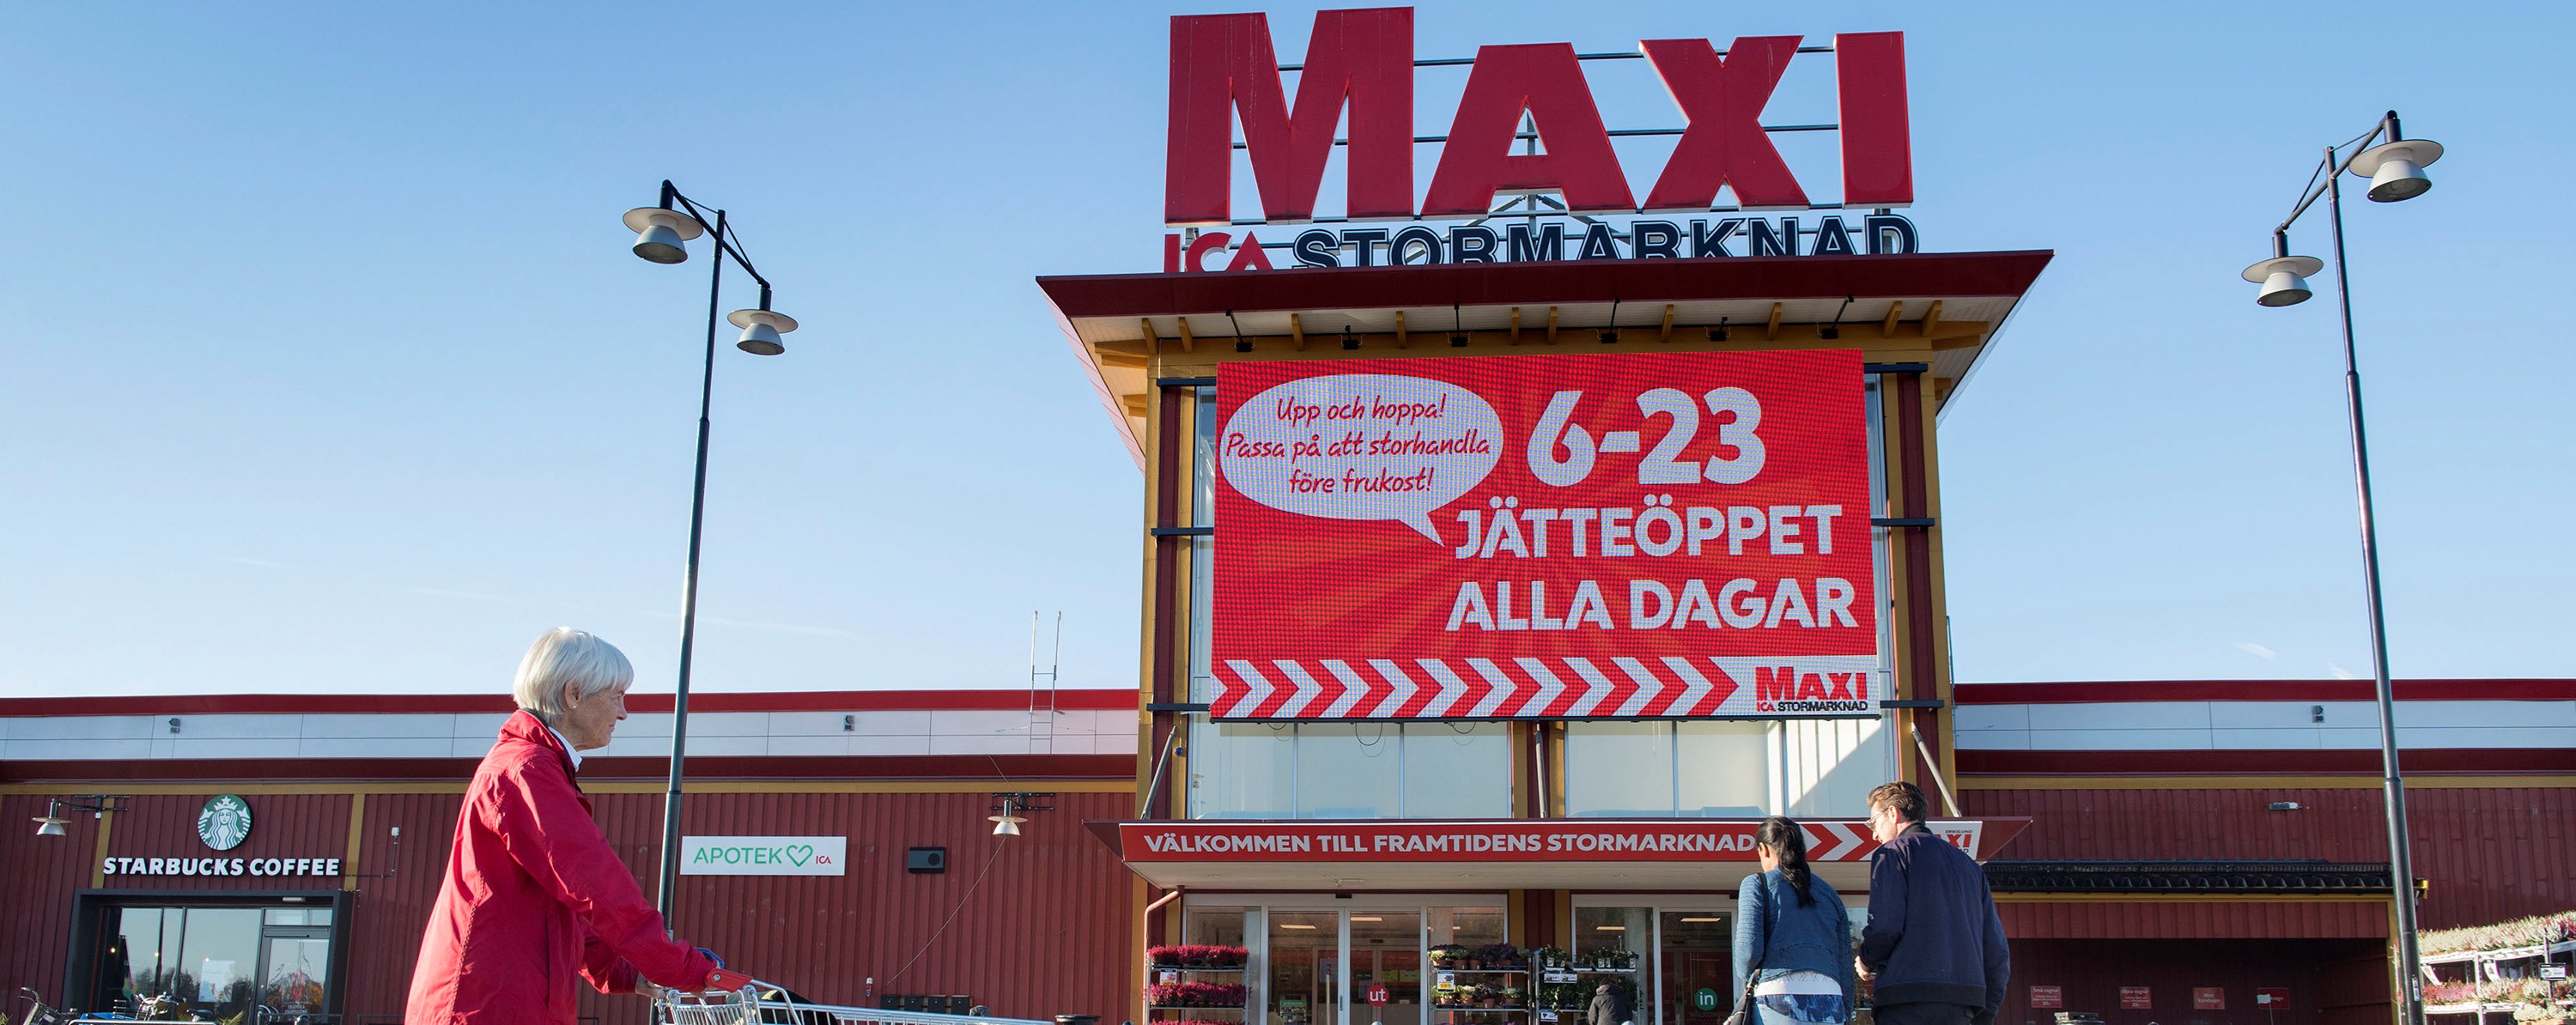 ICA Maxi is the ICA group's hypermarket concept. Photo: Jessica Gow/TT